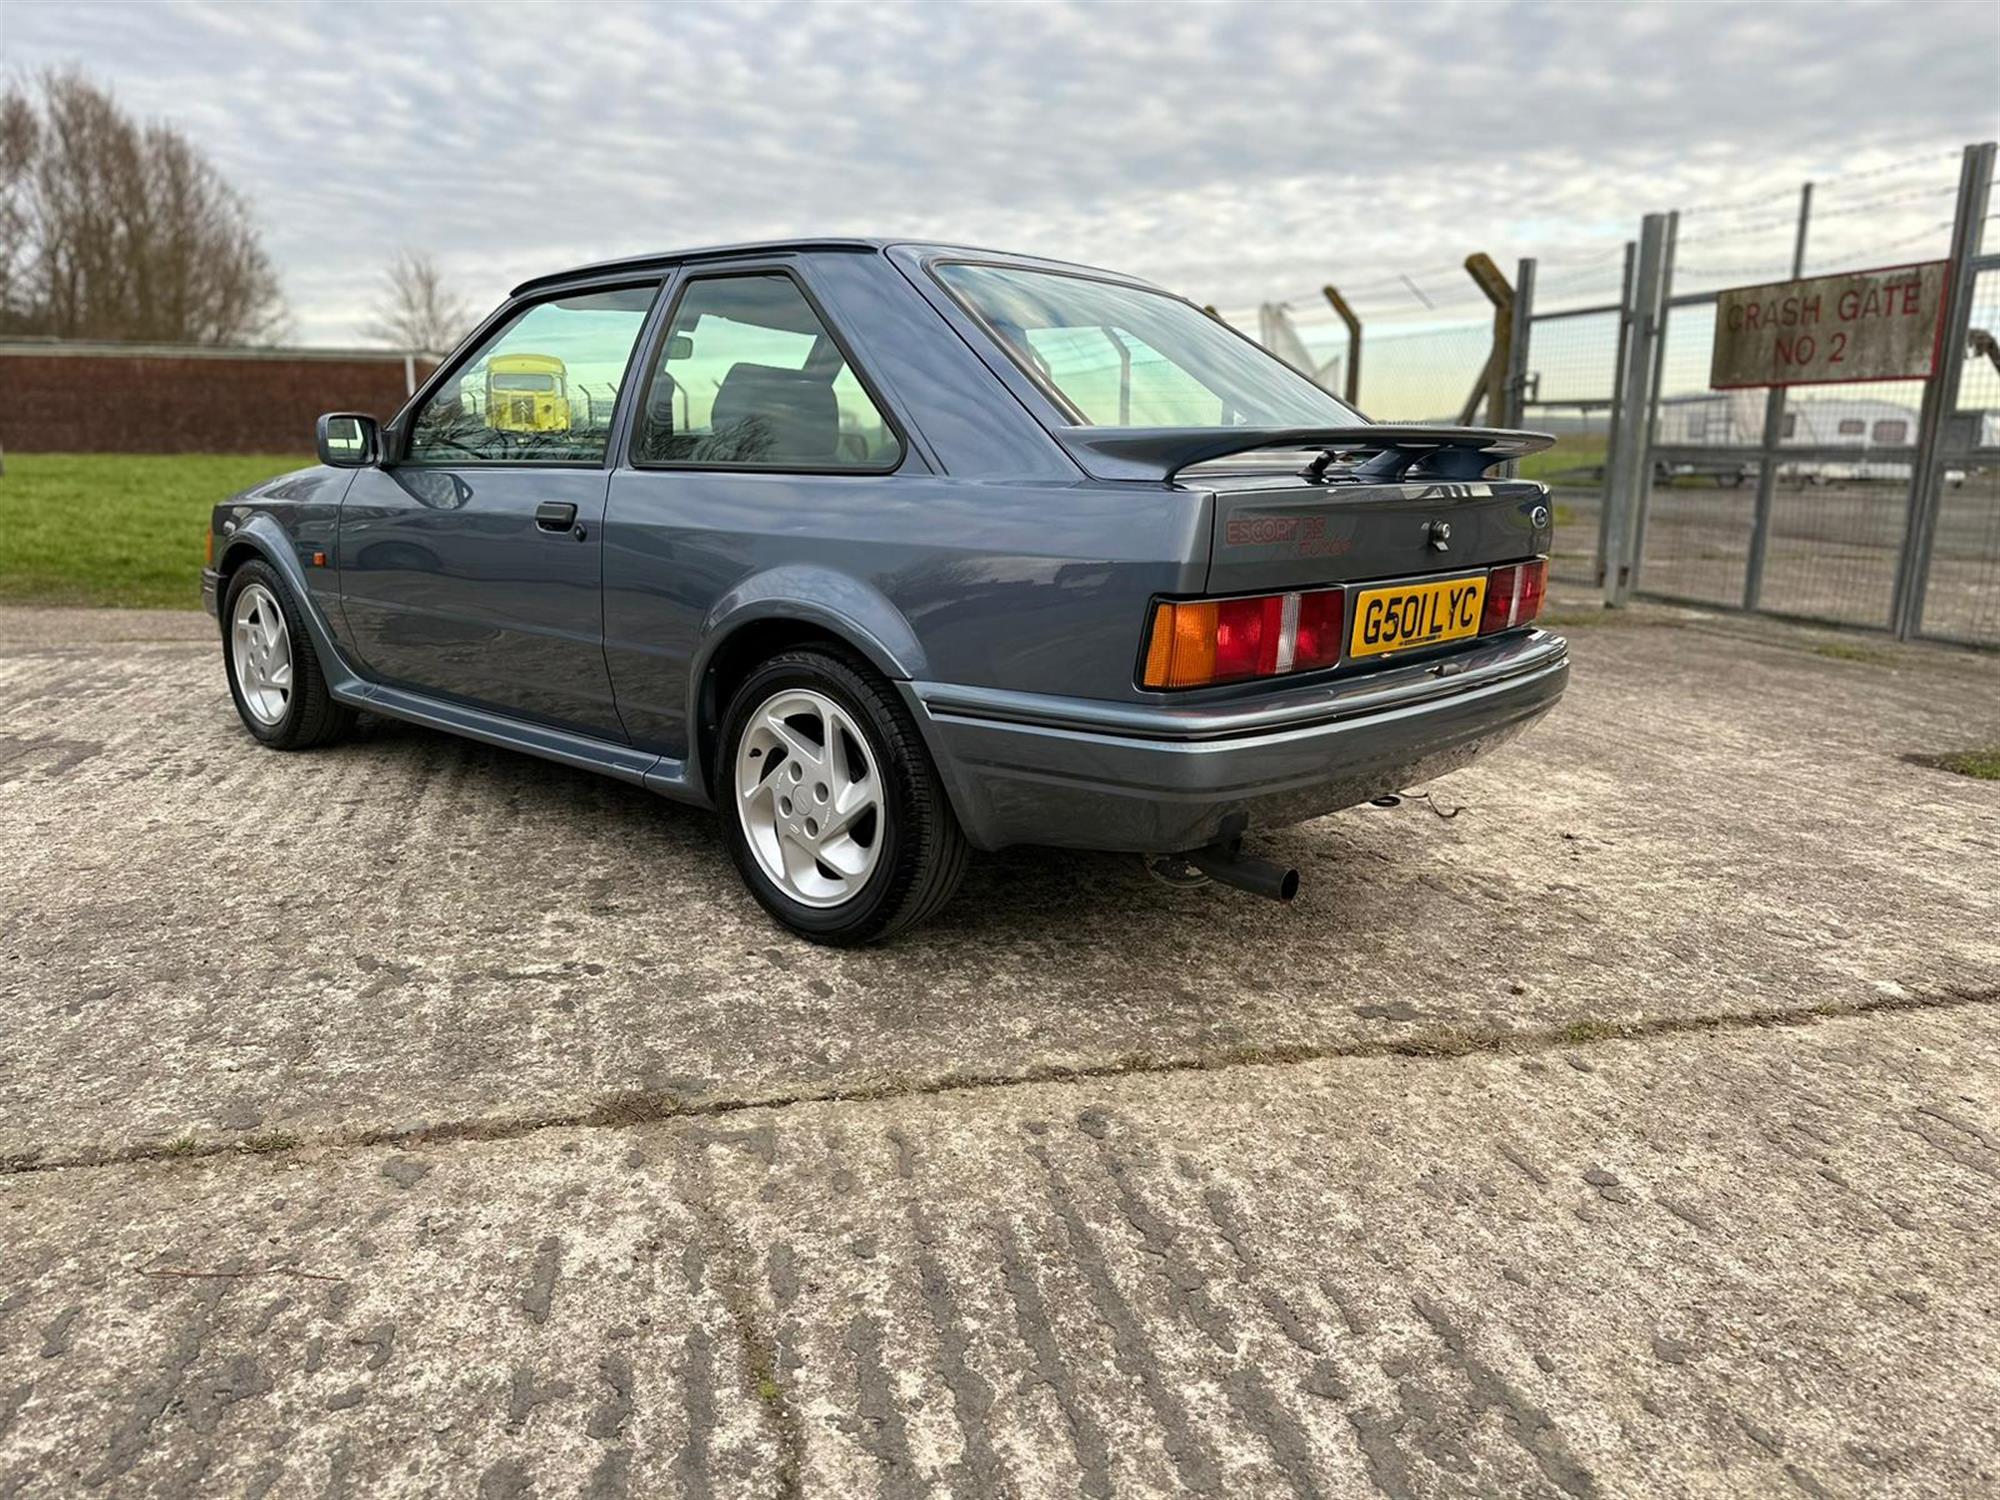 1989 Ford Escort RS Turbo S2 - Image 14 of 20